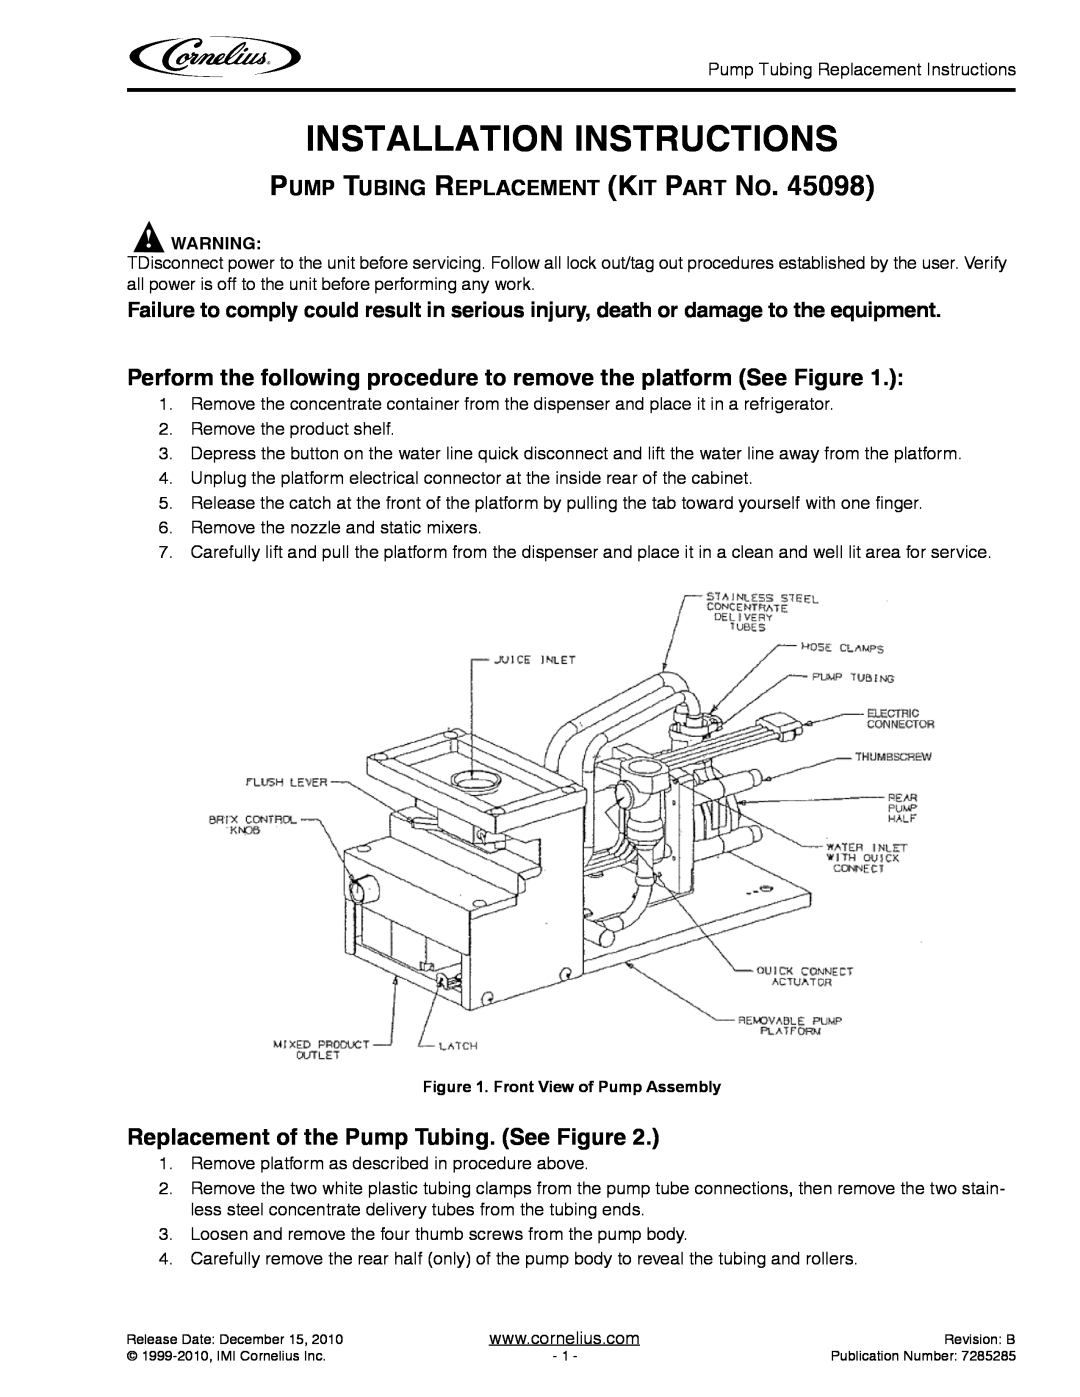 Cornelius 45098 installation instructions Installation Instructions, Replacement of the Pump Tubing. See Figure 